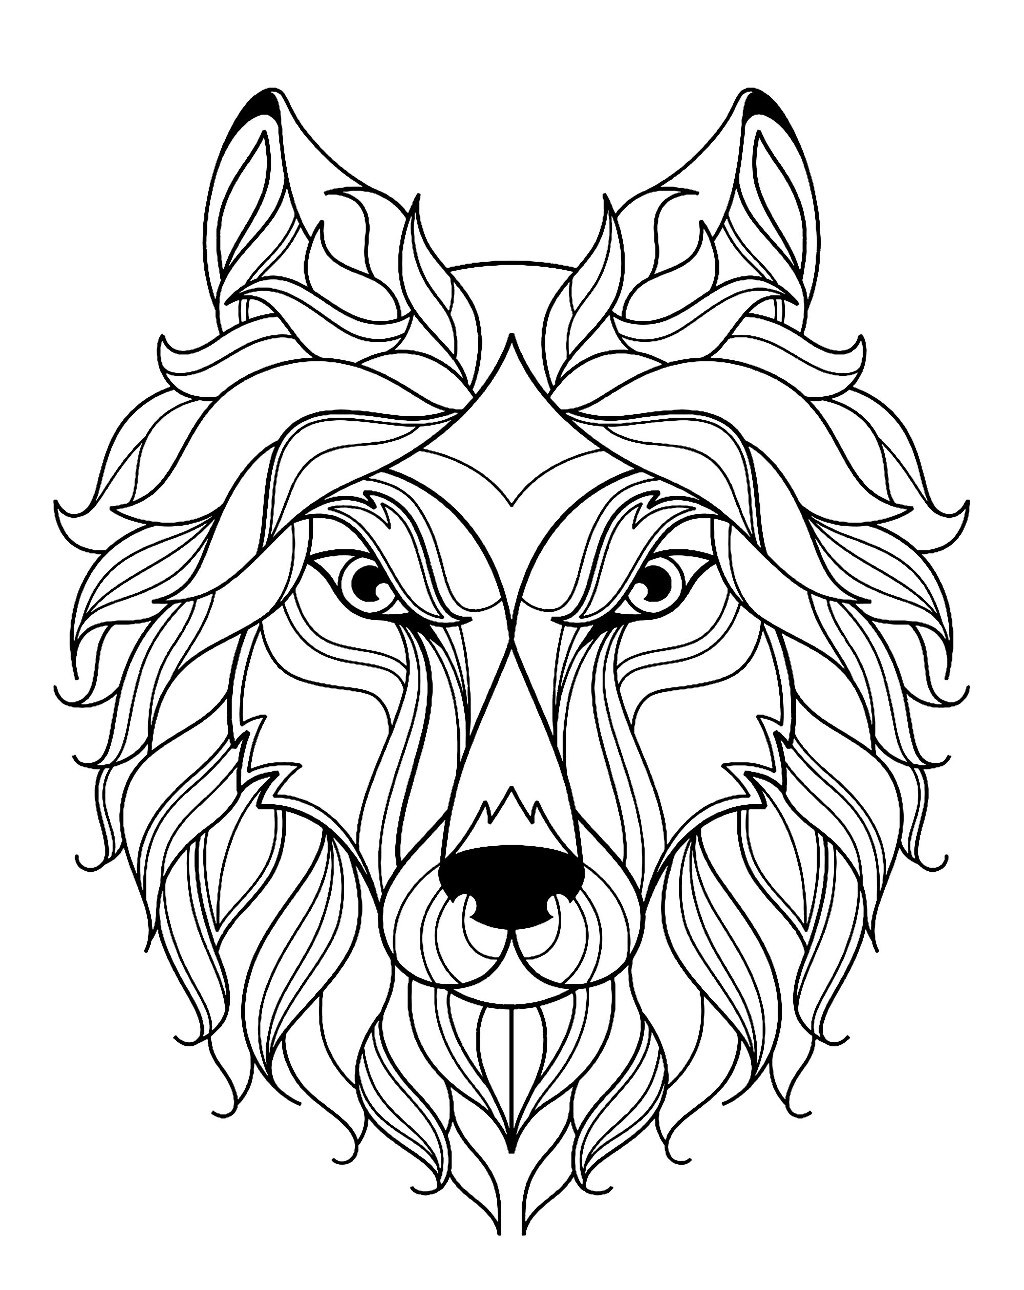 Wolf Fae Coloring Page for Kids and Adults - SheetalColor.com